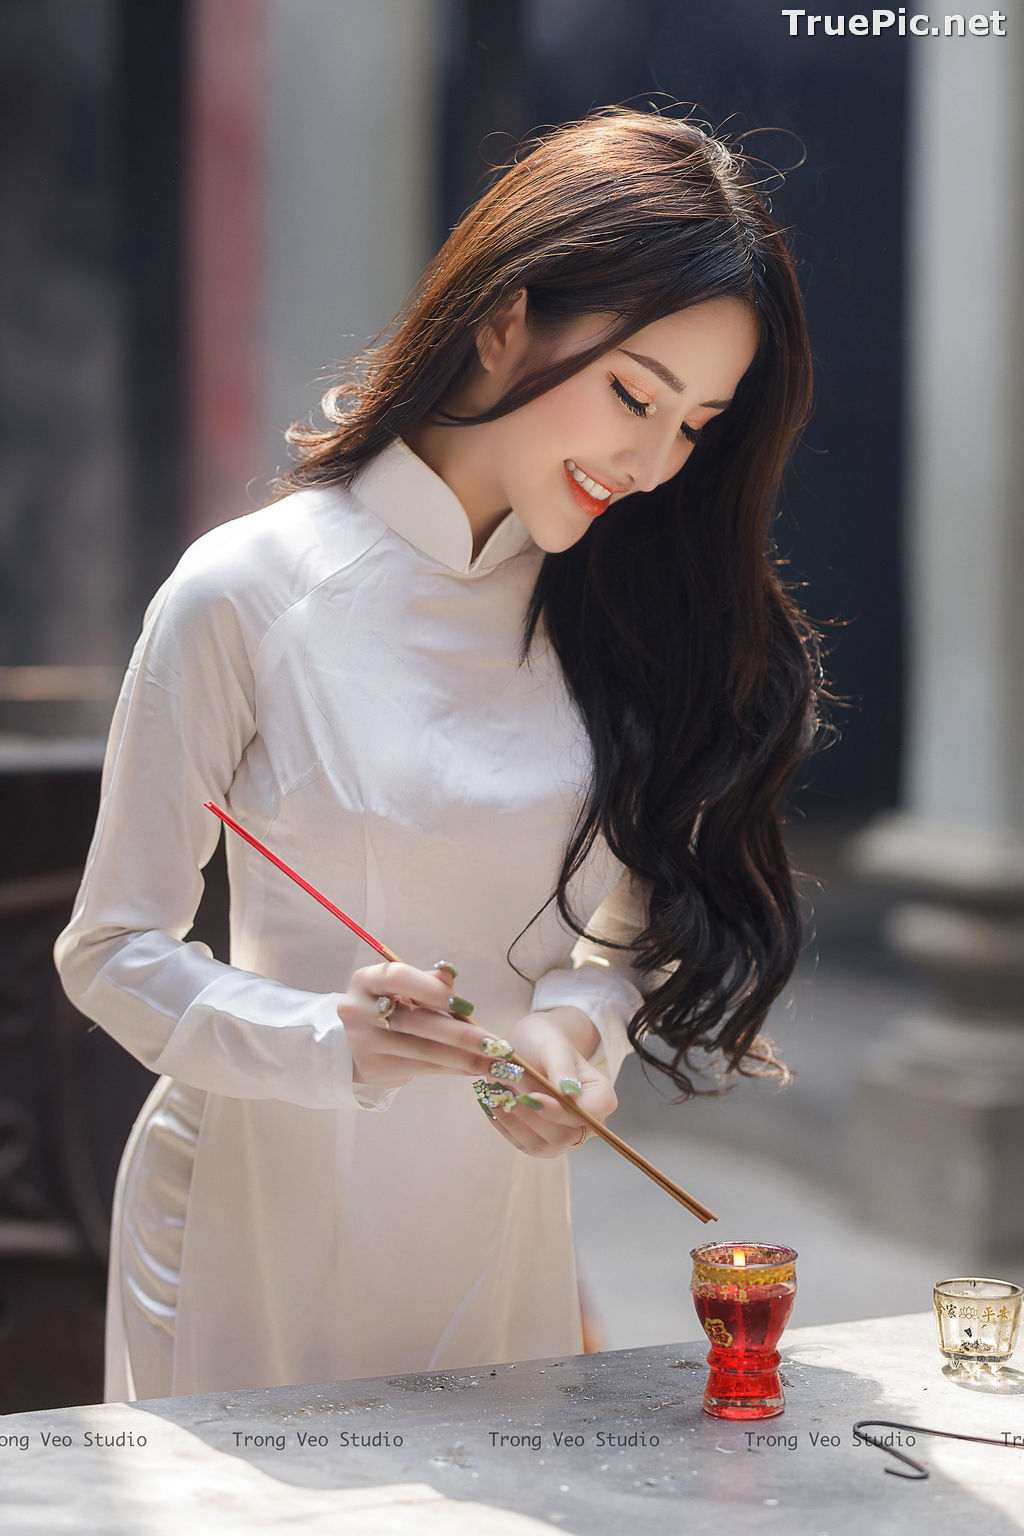 Image The Beauty of Vietnamese Girls with Traditional Dress (Ao Dai) #2 - TruePic.net - Picture-25